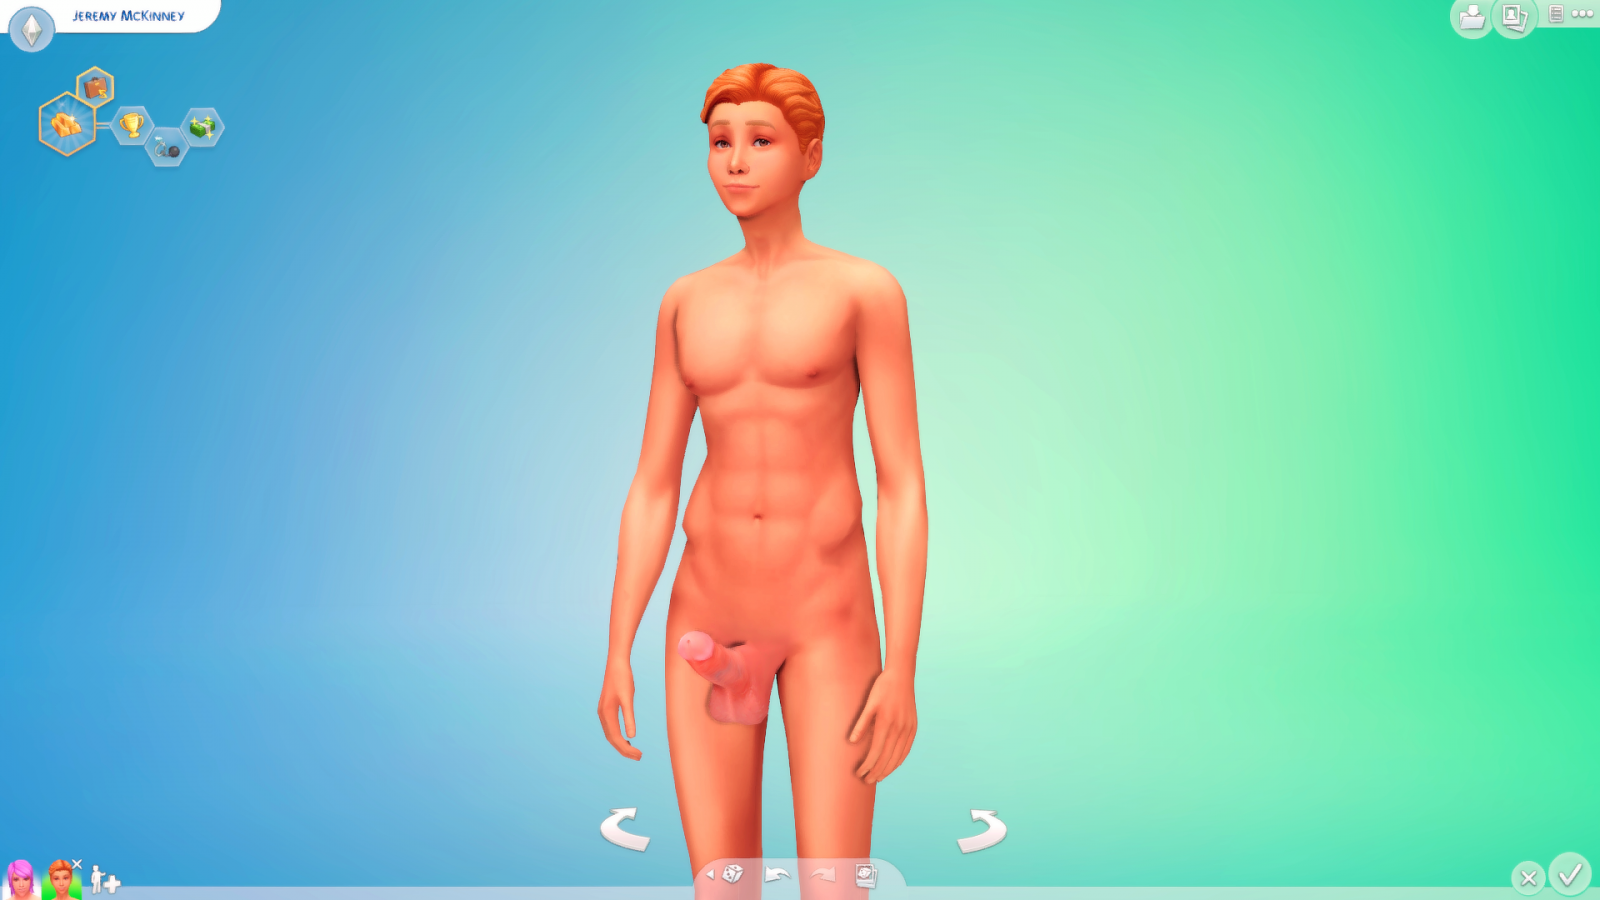 Sims 4 Pornstar Cock V40 Ww Rigged 20190417 Page 12 Downloads The Sims 4